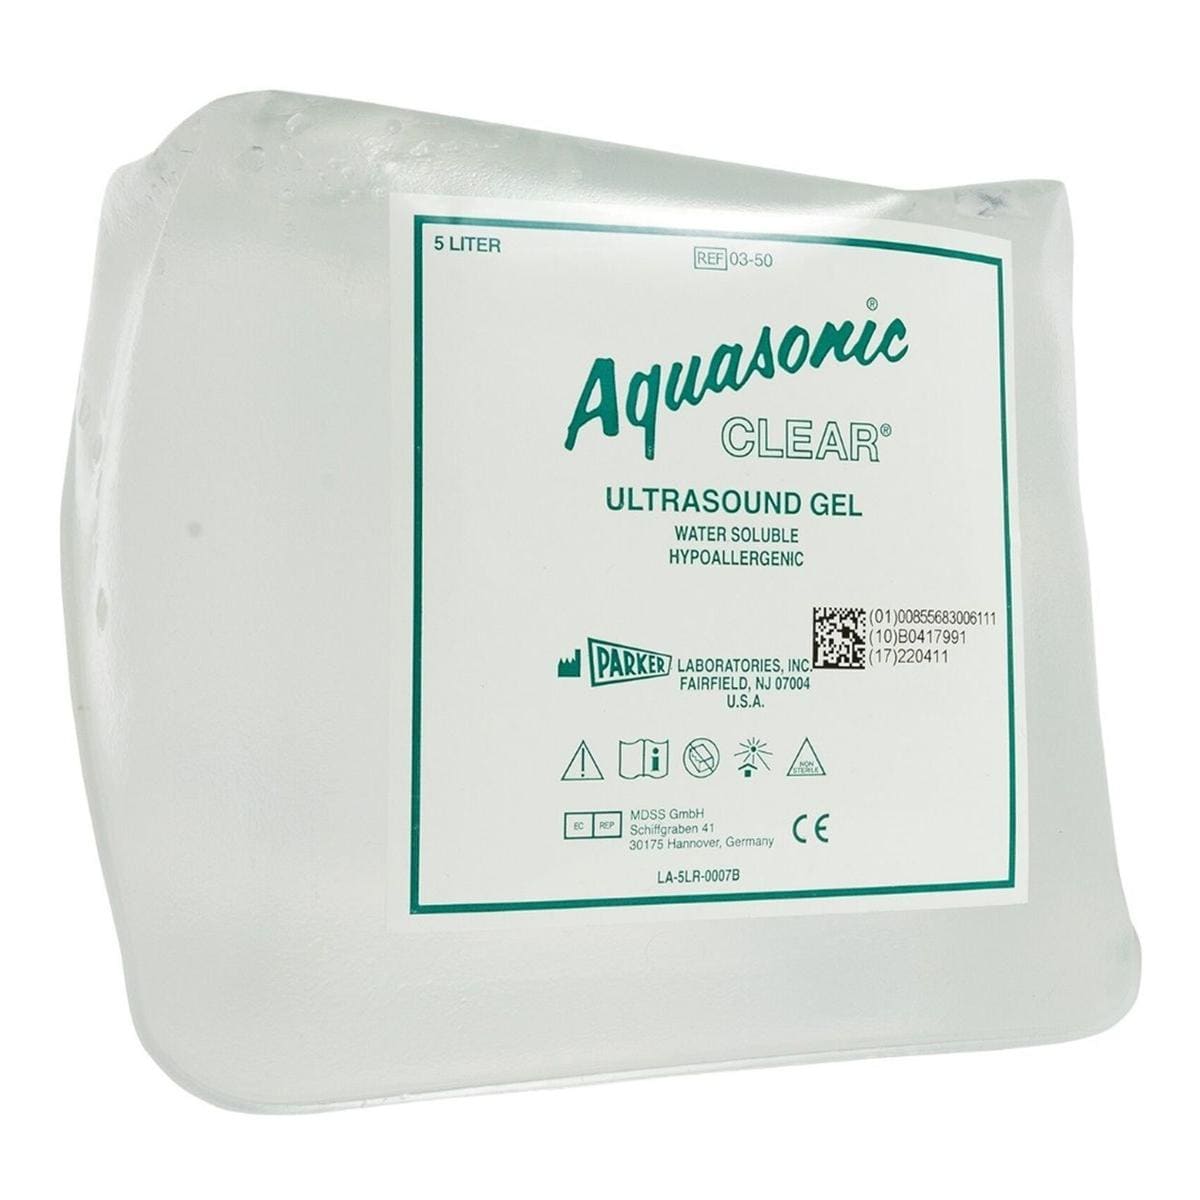 aquasonic ultrasound gel clear - container 5 liter